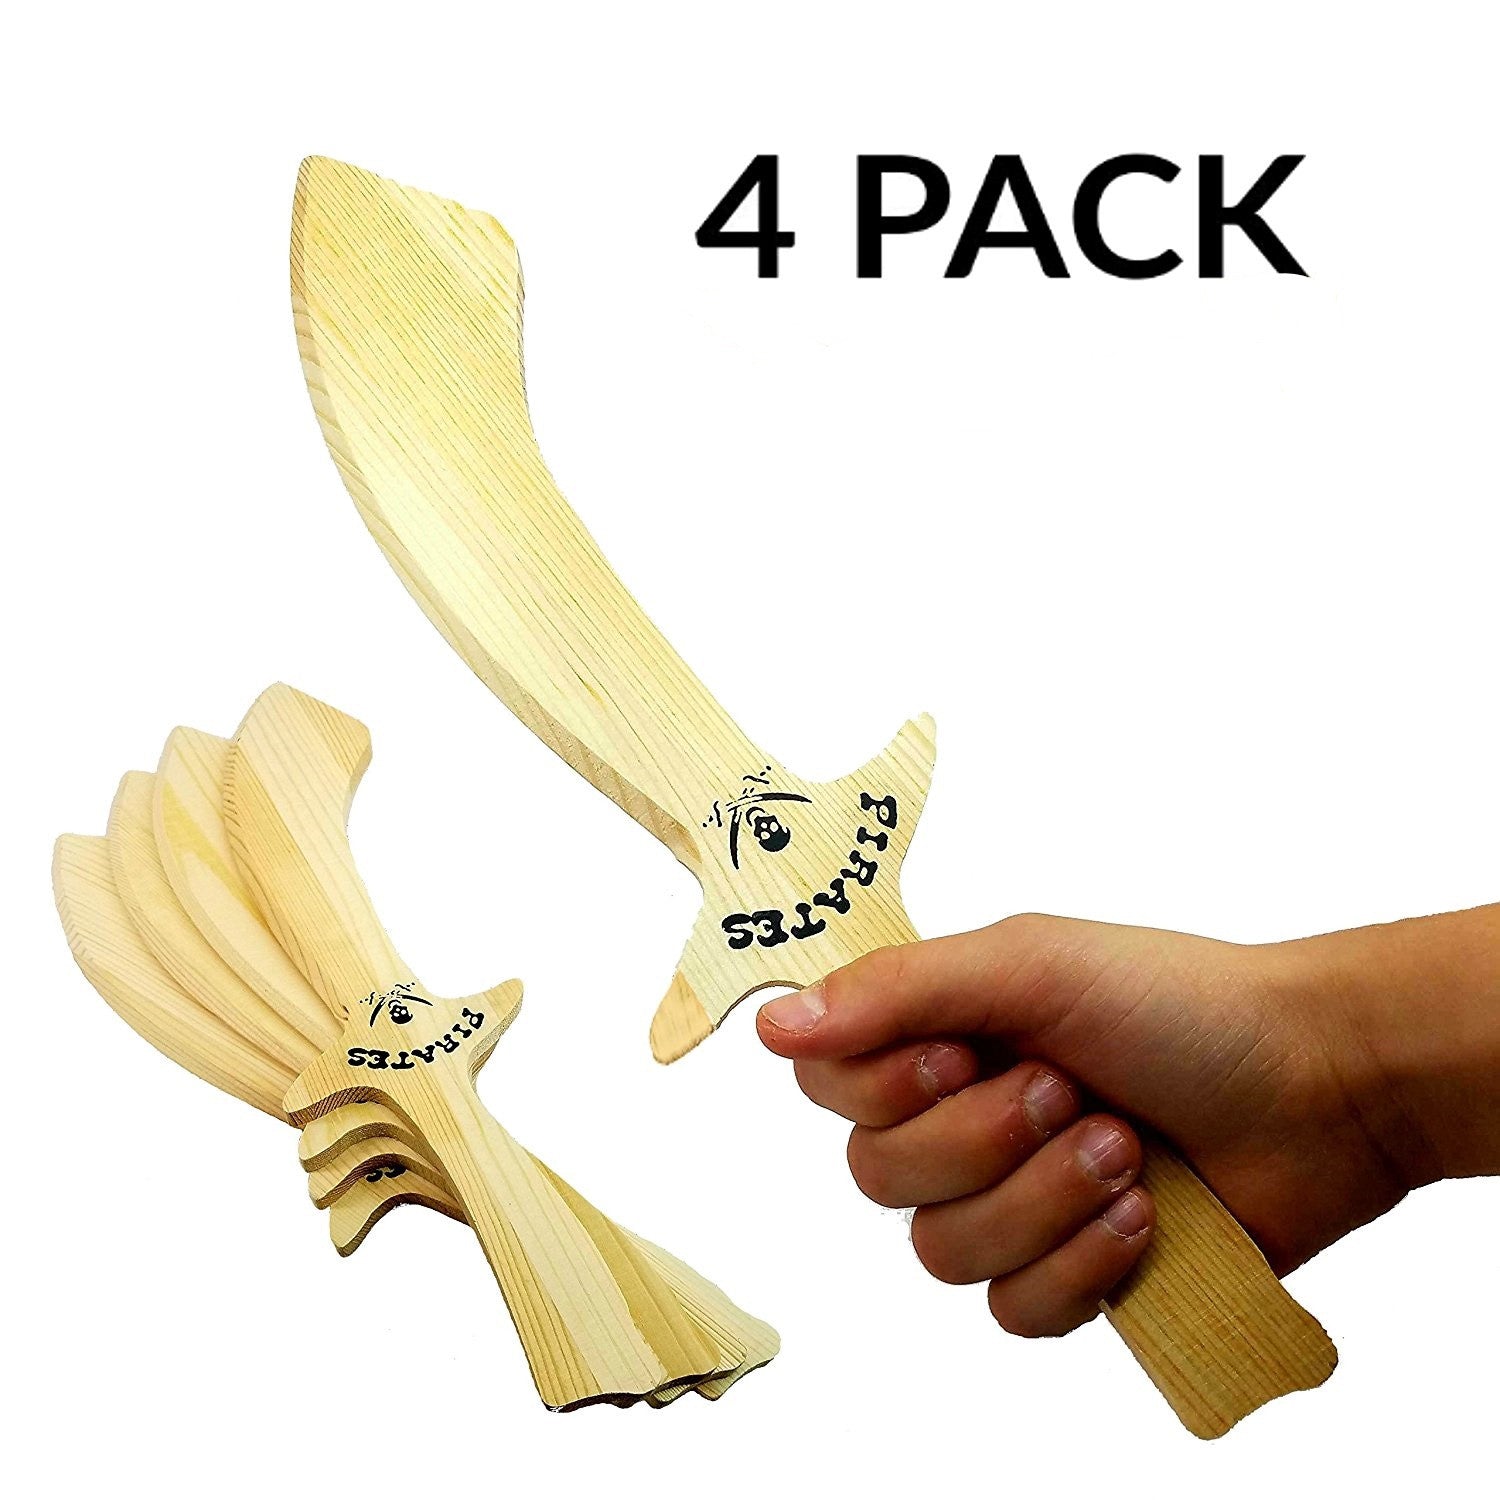 Wooden Toy Pirate Sword 4-Pack